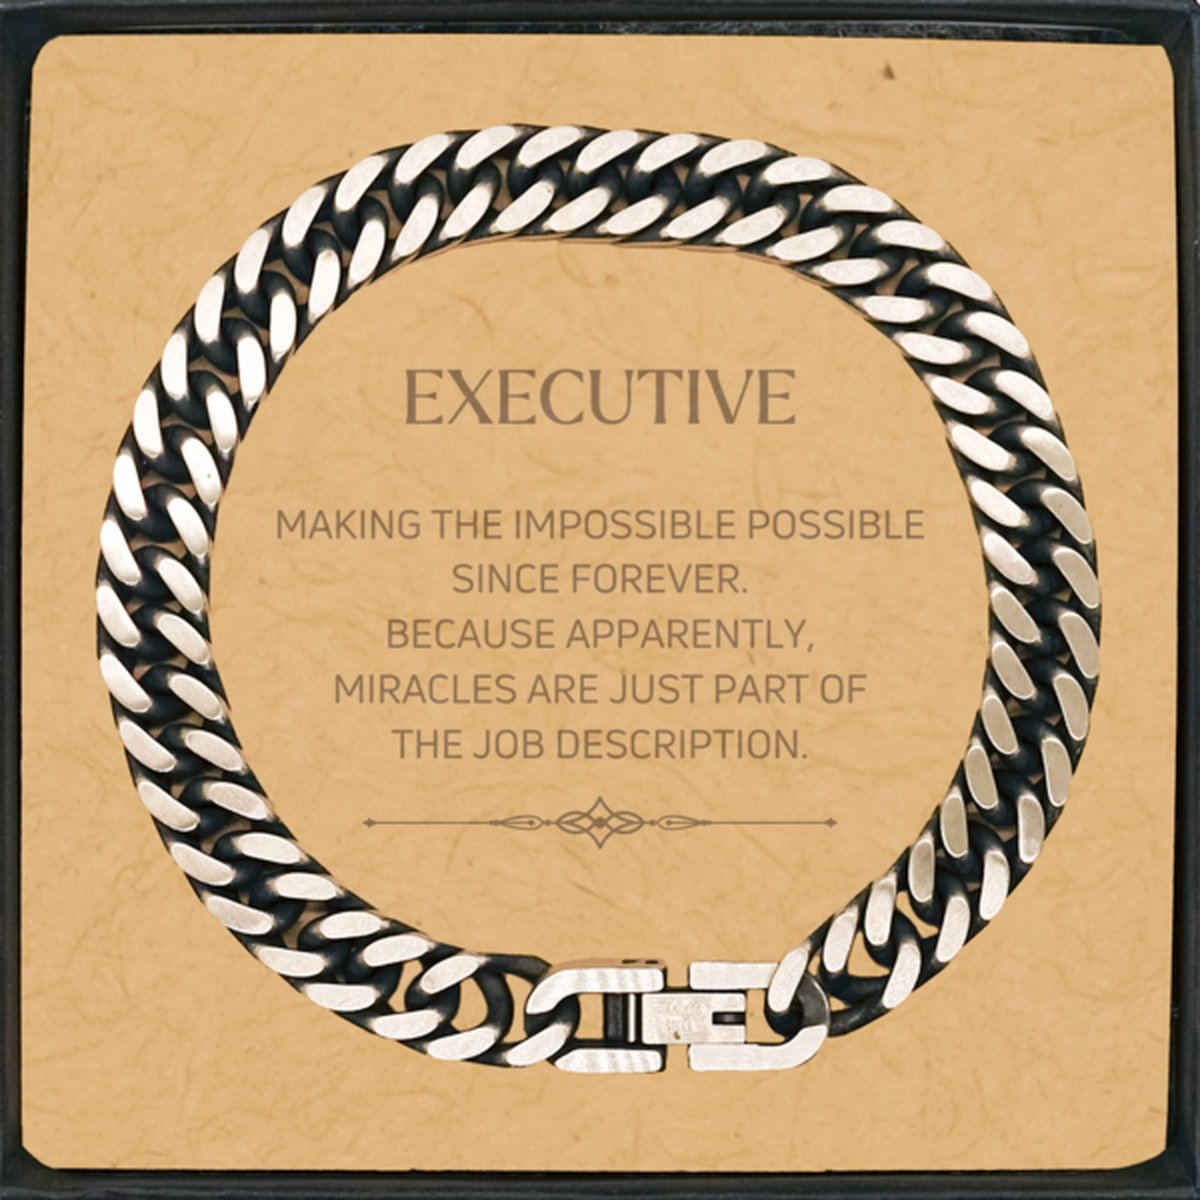 Funny Executive Gifts, Miracles are just part of the job description, Inspirational Birthday Cuban Link Chain Bracelet For Executive, Men, Women, Coworkers, Friends, Boss